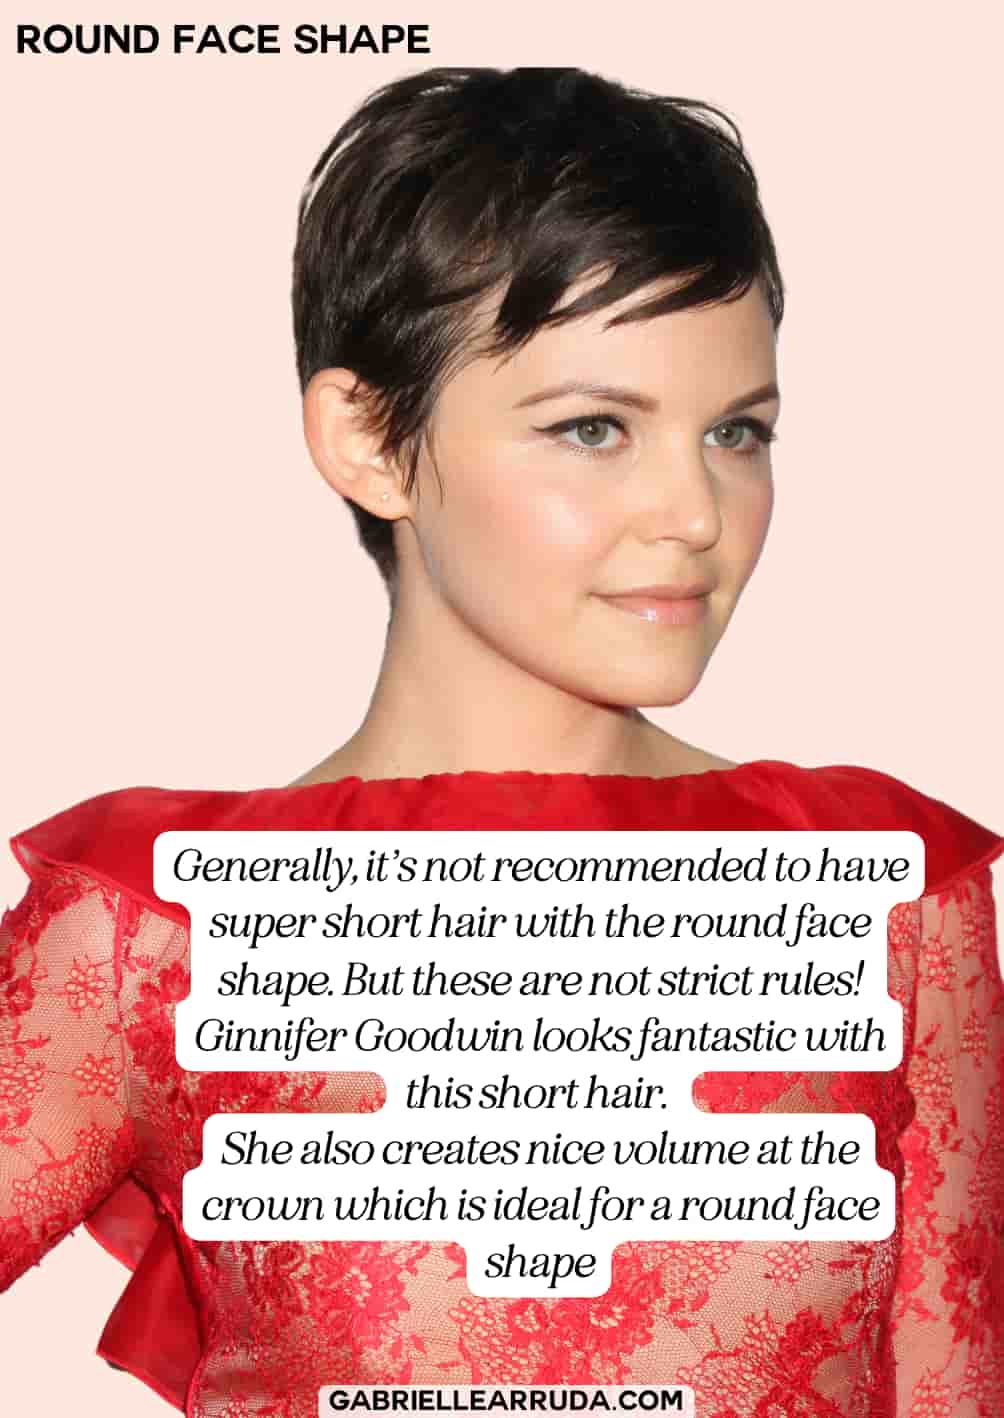 ginnifer goodwin with pixie cut showing that some round faces can pull this out